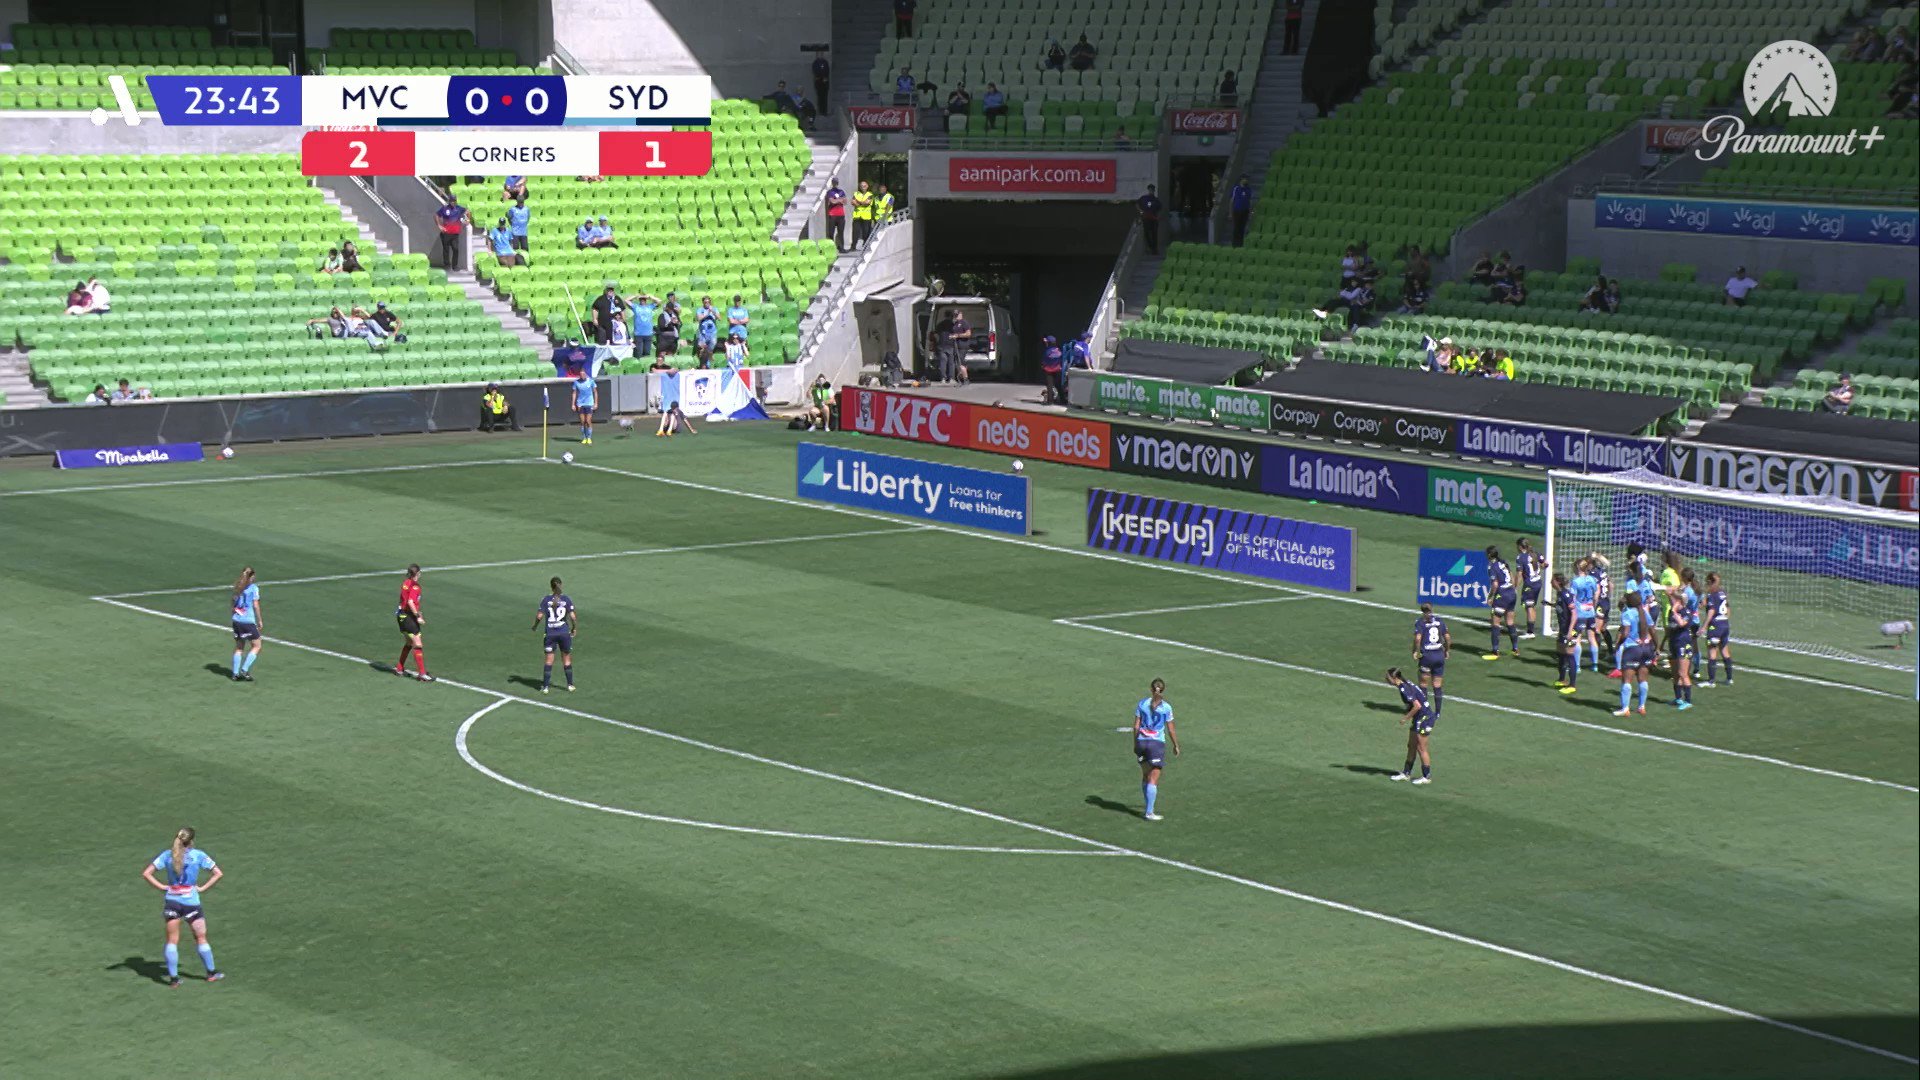 #BigBlue breakthrough for @SydneyFC! 

Princess Ibini works it over the line and the Sky blues hit the front 💥

Catch all the action LIVE on @Channel10AU PLAY  📺

Follow live:  @LibFinancial”